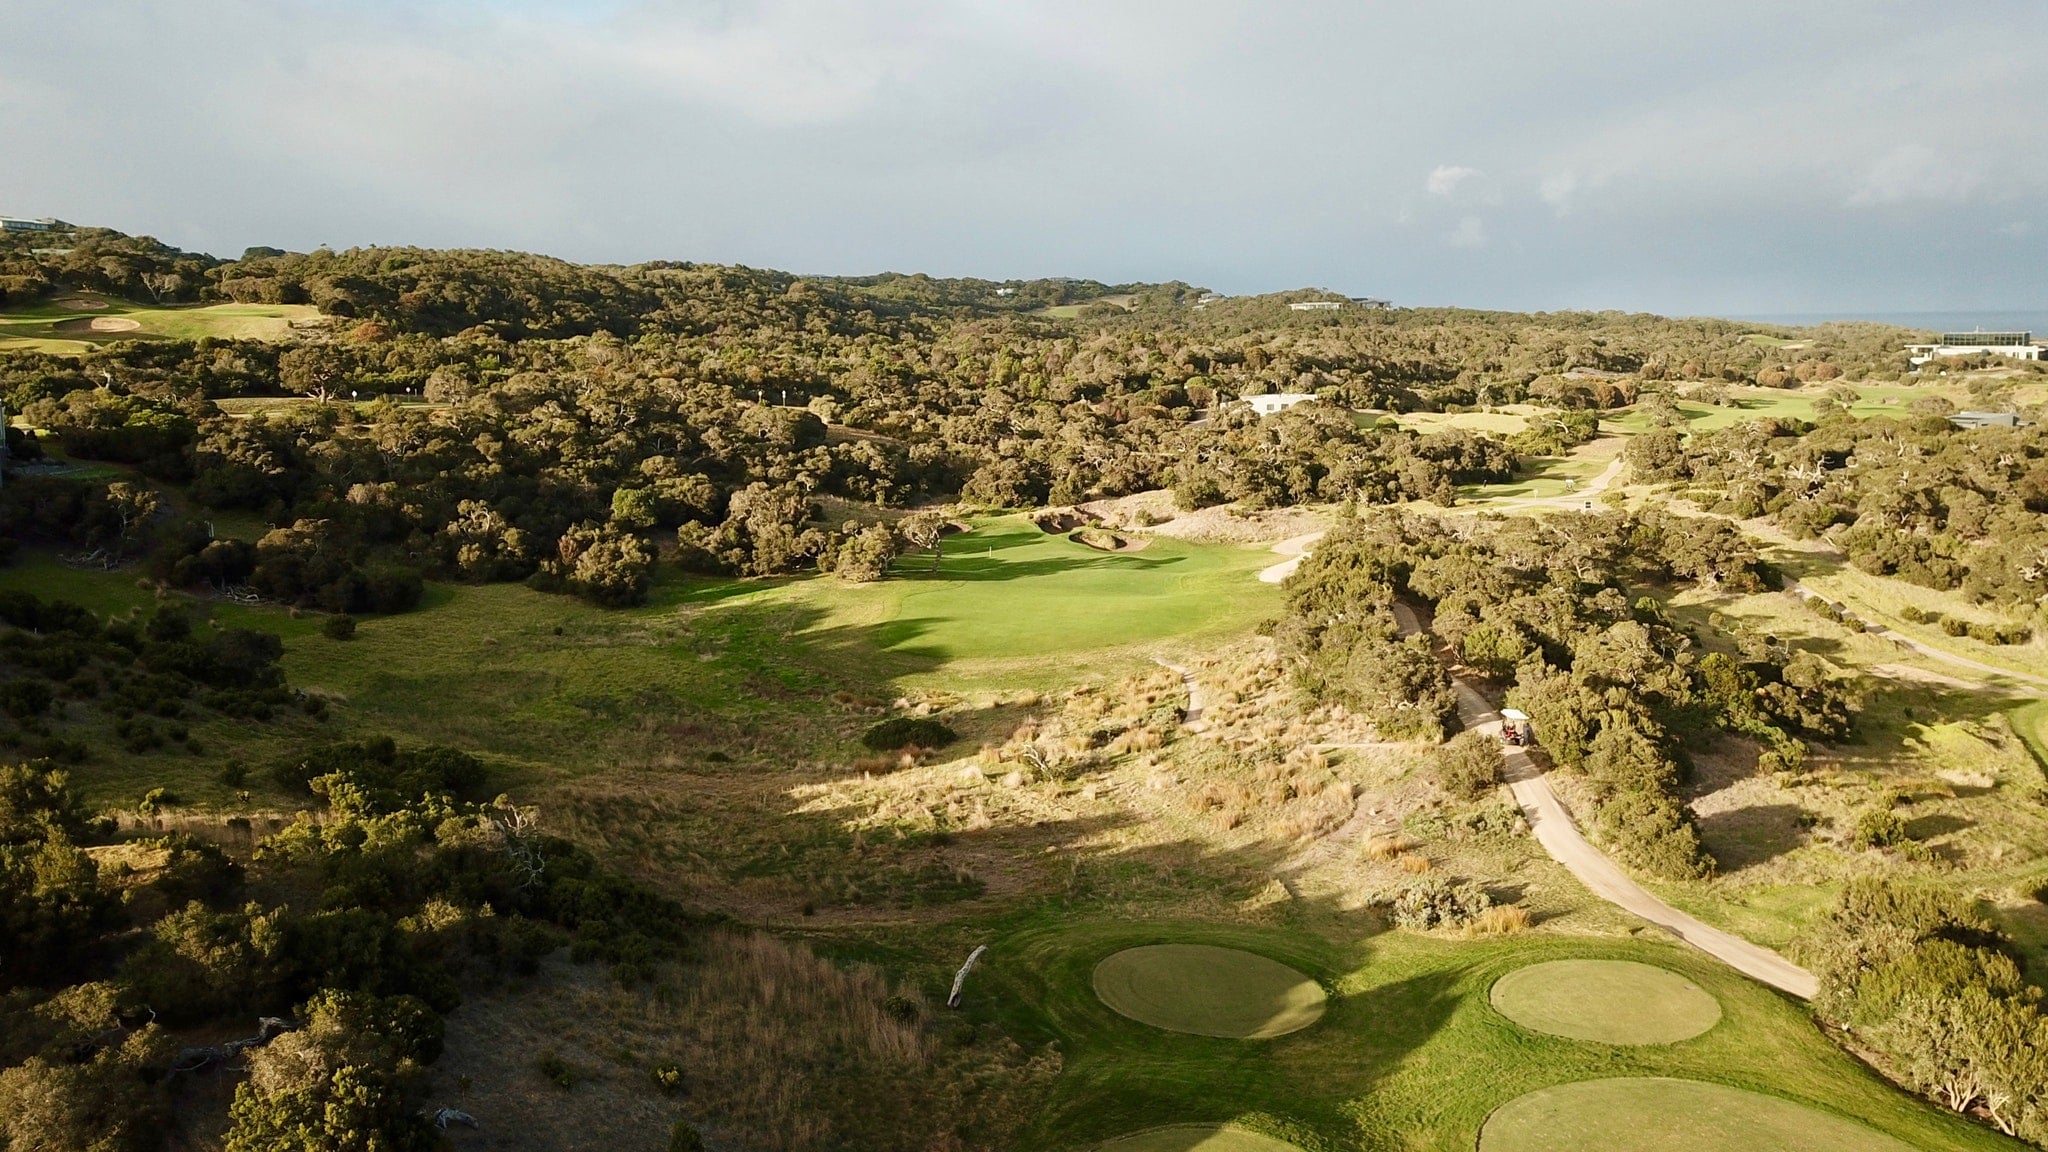 Aerial view of the par-3 seventeenth hole on the Moonah course